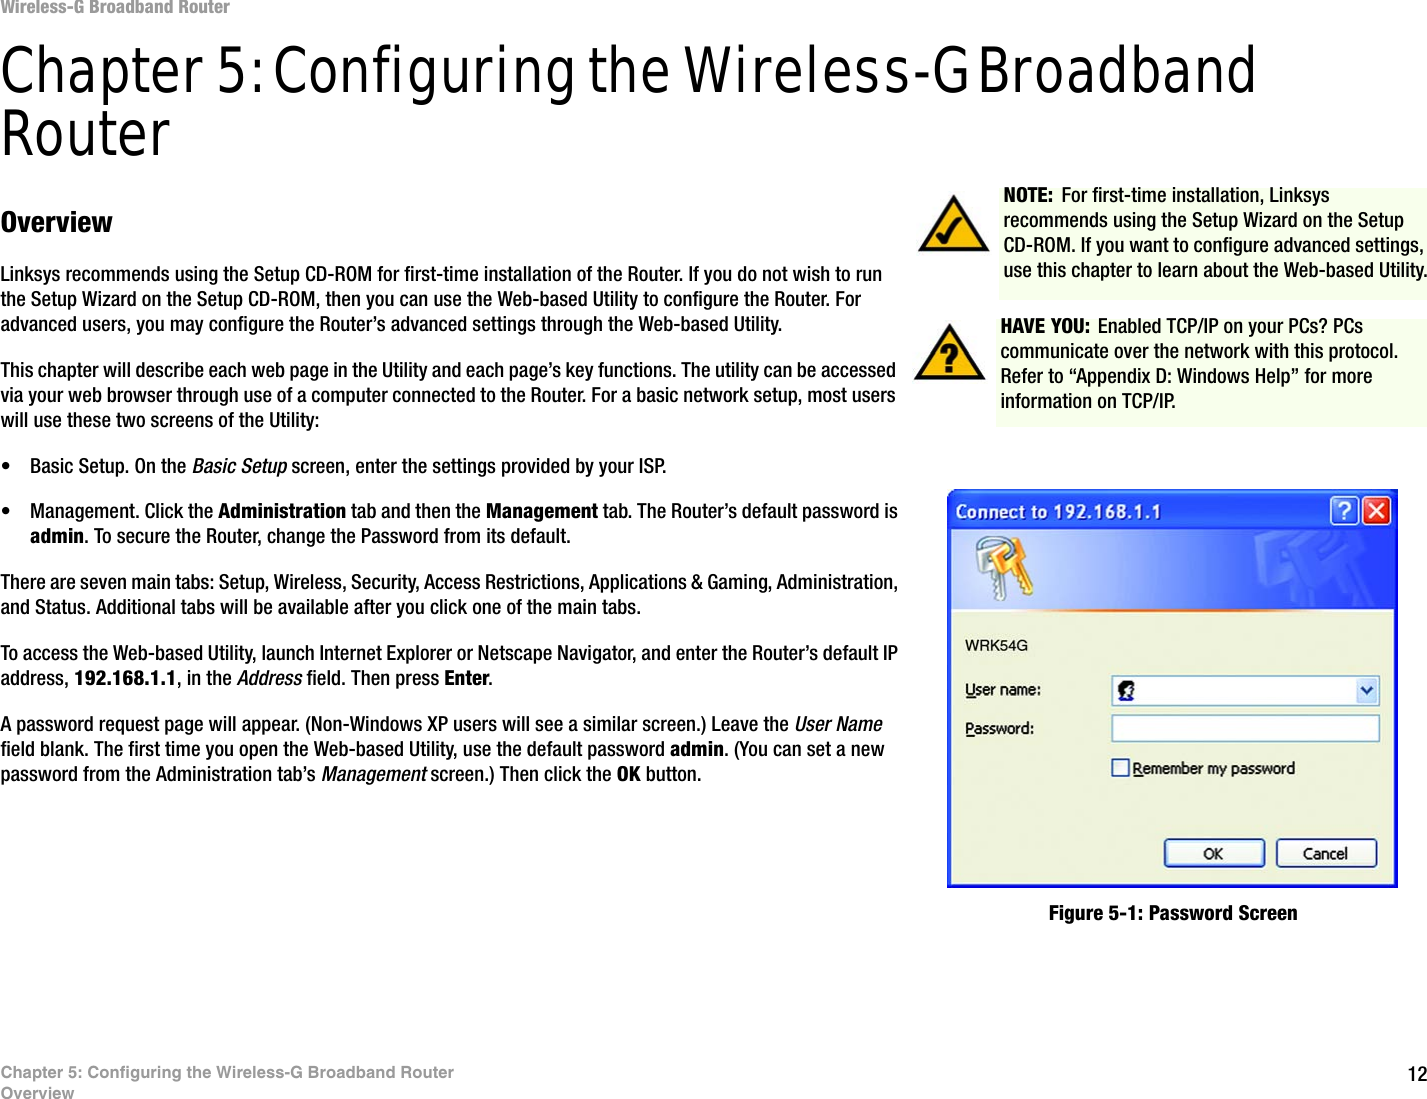 12Chapter 5: Configuring the Wireless-G Broadband RouterOverviewWireless-G Broadband RouterChapter 5: Configuring the Wireless-G Broadband RouterOverviewLinksys recommends using the Setup CD-ROM for first-time installation of the Router. If you do not wish to run the Setup Wizard on the Setup CD-ROM, then you can use the Web-based Utility to configure the Router. For advanced users, you may configure the Router’s advanced settings through the Web-based Utility.This chapter will describe each web page in the Utility and each page’s key functions. The utility can be accessed via your web browser through use of a computer connected to the Router. For a basic network setup, most users will use these two screens of the Utility:• Basic Setup. On the Basic Setup screen, enter the settings provided by your ISP.• Management. Click the Administration tab and then the Management tab. The Router’s default password is admin. To secure the Router, change the Password from its default.There are seven main tabs: Setup, Wireless, Security, Access Restrictions, Applications &amp; Gaming, Administration, and Status. Additional tabs will be available after you click one of the main tabs.To access the Web-based Utility, launch Internet Explorer or Netscape Navigator, and enter the Router’s default IP address, 192.168.1.1, in the Address field. Then press Enter. A password request page will appear. (Non-Windows XP users will see a similar screen.) Leave the User Name field blank. The first time you open the Web-based Utility, use the default password admin. (You can set a new password from the Administration tab’s Management screen.) Then click the OK button. HAVE YOU: Enabled TCP/IP on your PCs? PCs communicate over the network with this protocol. Refer to “Appendix D: Windows Help” for more information on TCP/IP.NOTE: For first-time installation, Linksys recommends using the Setup Wizard on the Setup CD-ROM. If you want to configure advanced settings, use this chapter to learn about the Web-based Utility.Figure 5-1: Password Screen